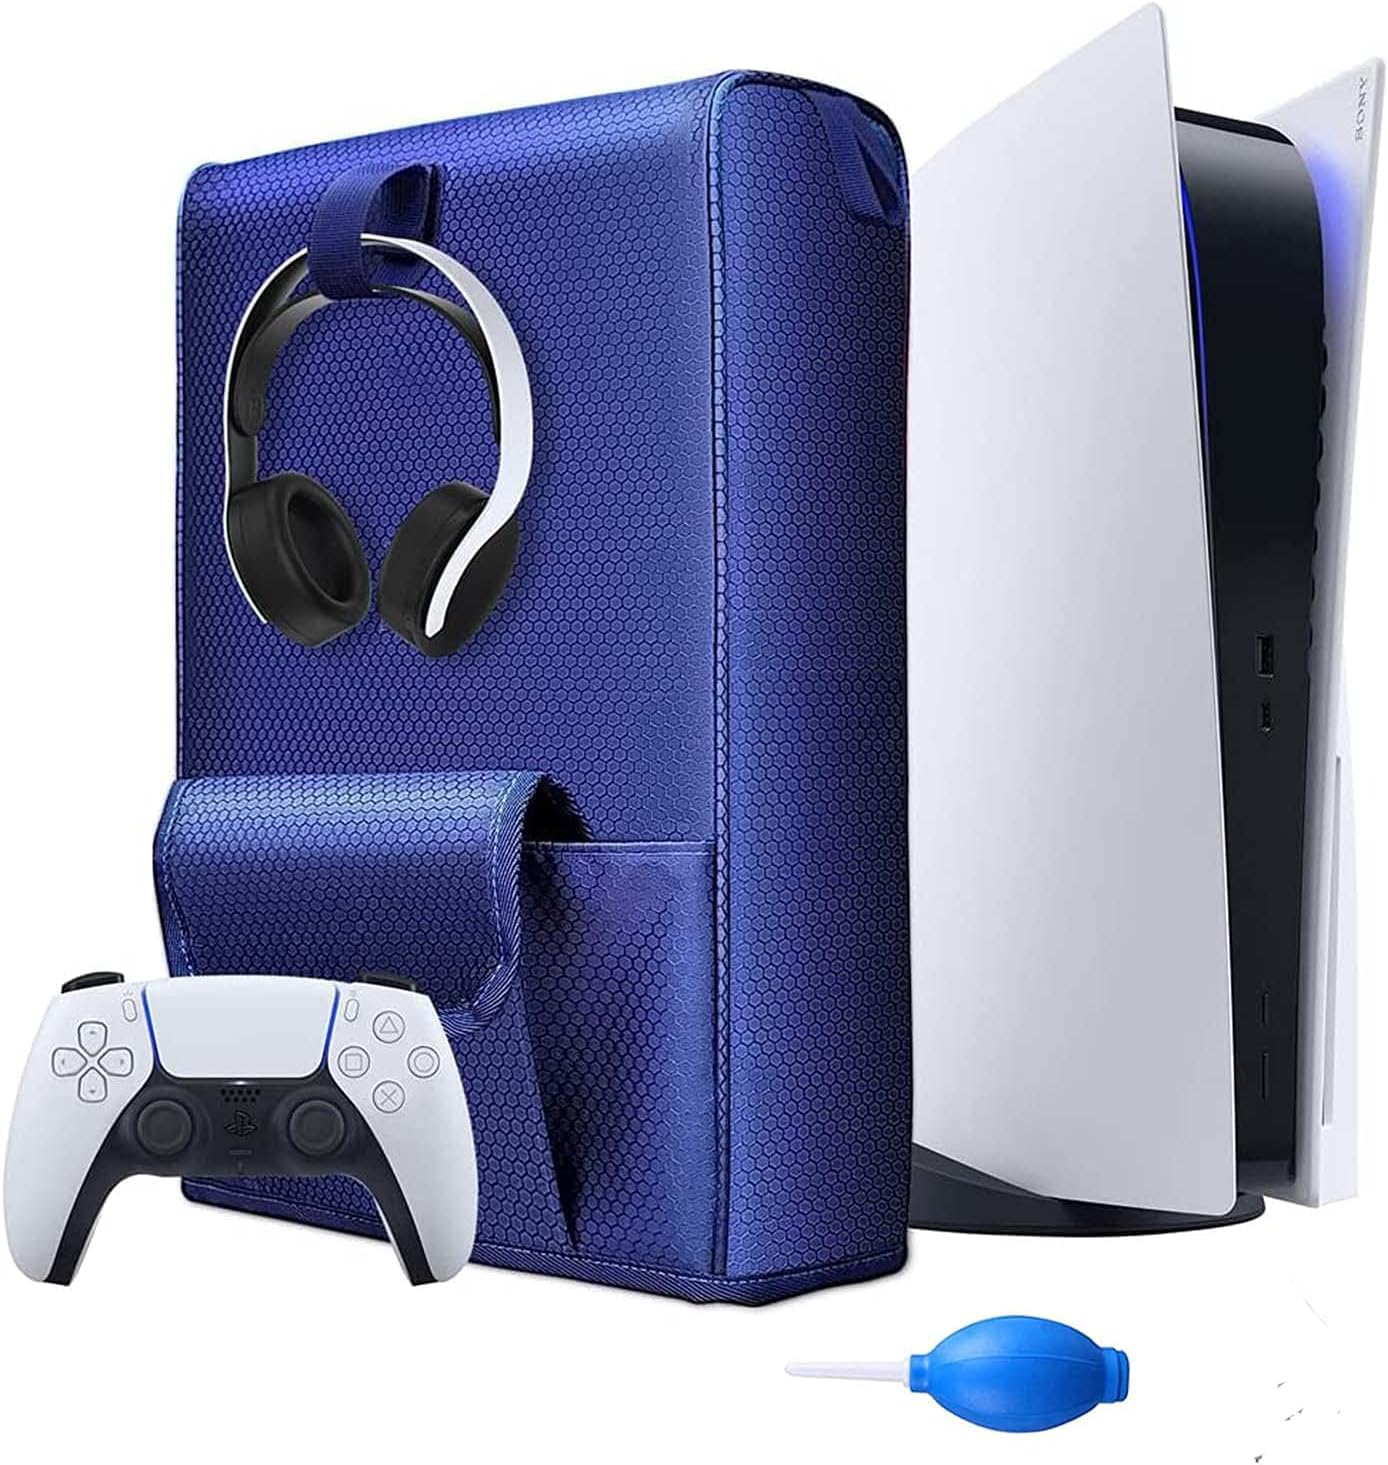 New World Dust Cover For PS5 , Soft Neat Lining Dust Guard for PS5 Console, Anti Scratch Waterproof Cover Sleeve for Playstation 5 Console Digital Edition & Disc Edition -Blue